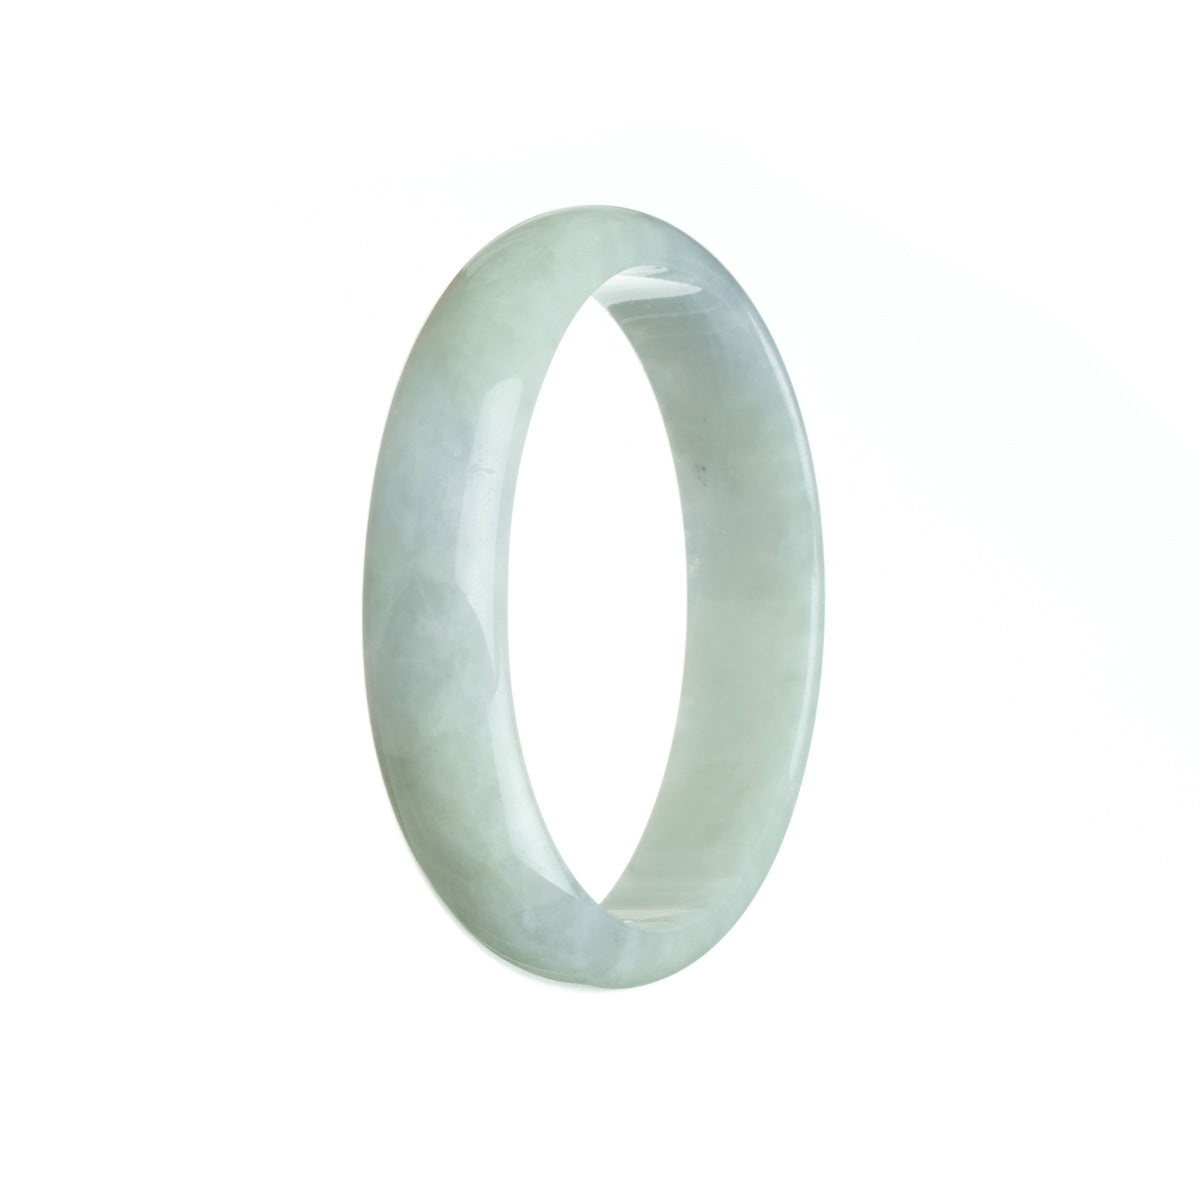 A beautiful Burmese jade bangle with a pale green color and subtle lavender undertones, featuring a unique half moon shape. Expertly crafted and sourced from natural materials.